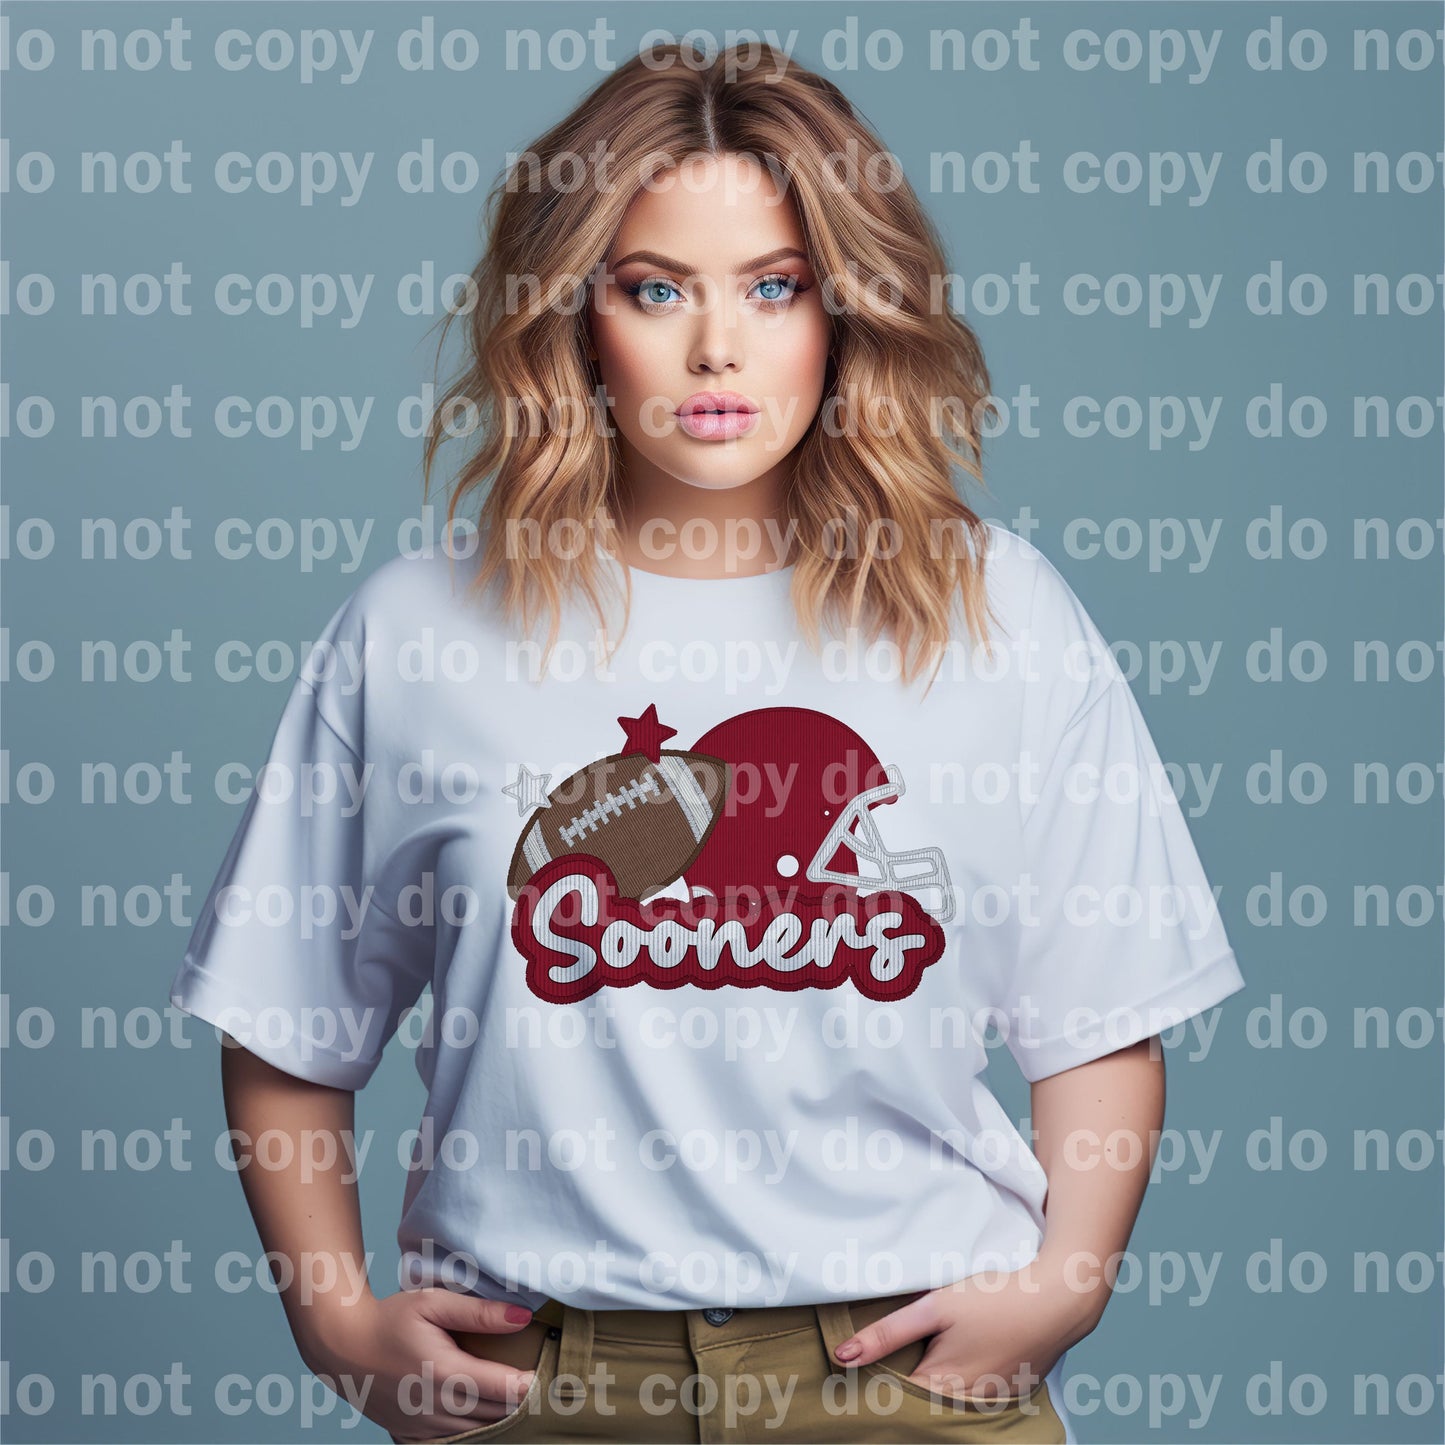 Sooners Football Embroidery Dream Print or Sublimation Print